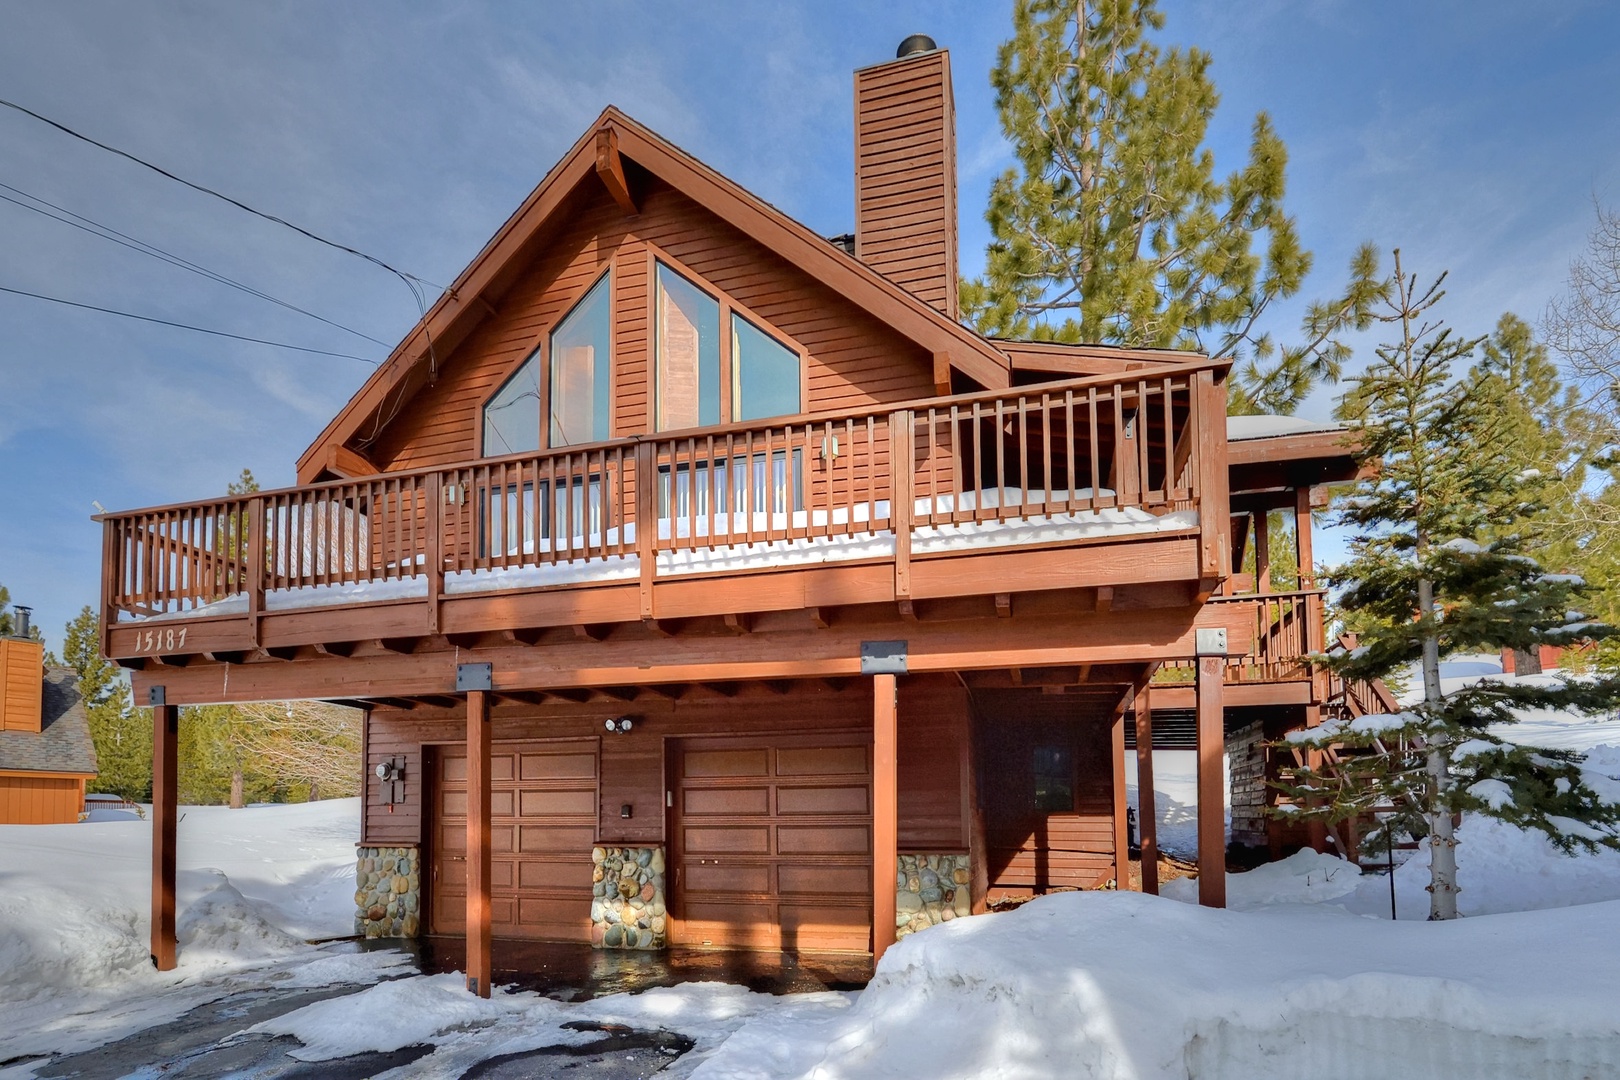 Our Gorgeous Wolfgang Vacation Cabin Rental in Truckee